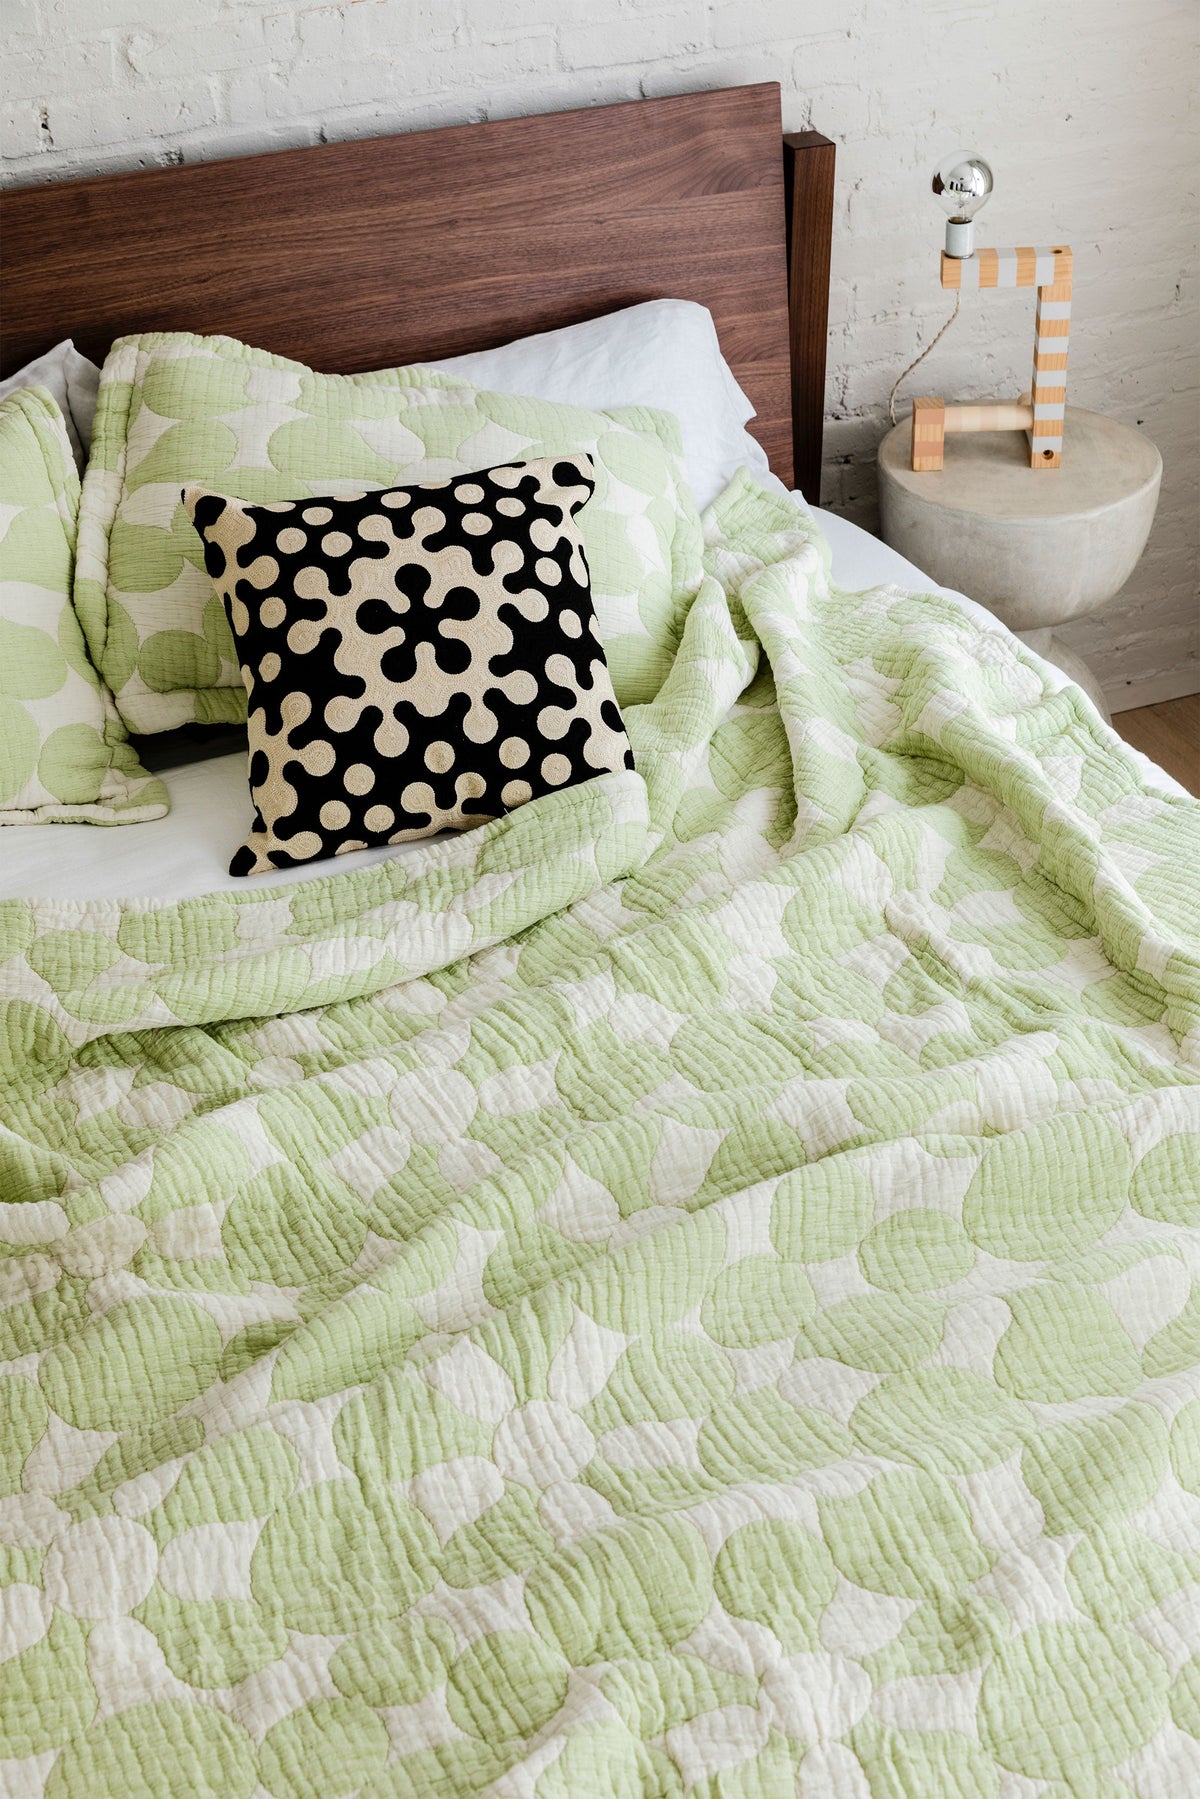 Dusen Dusen Coverlet Set in spring green and white Penrose print. Woven matelassé coverlet with an inner layer of insulation for a quilted effect. Stonewashed, with an extra soft and gauzy hand feel. 100% cotton shell, polyester fill. Machine wash cold and tumble dry low. Made in Portugal;